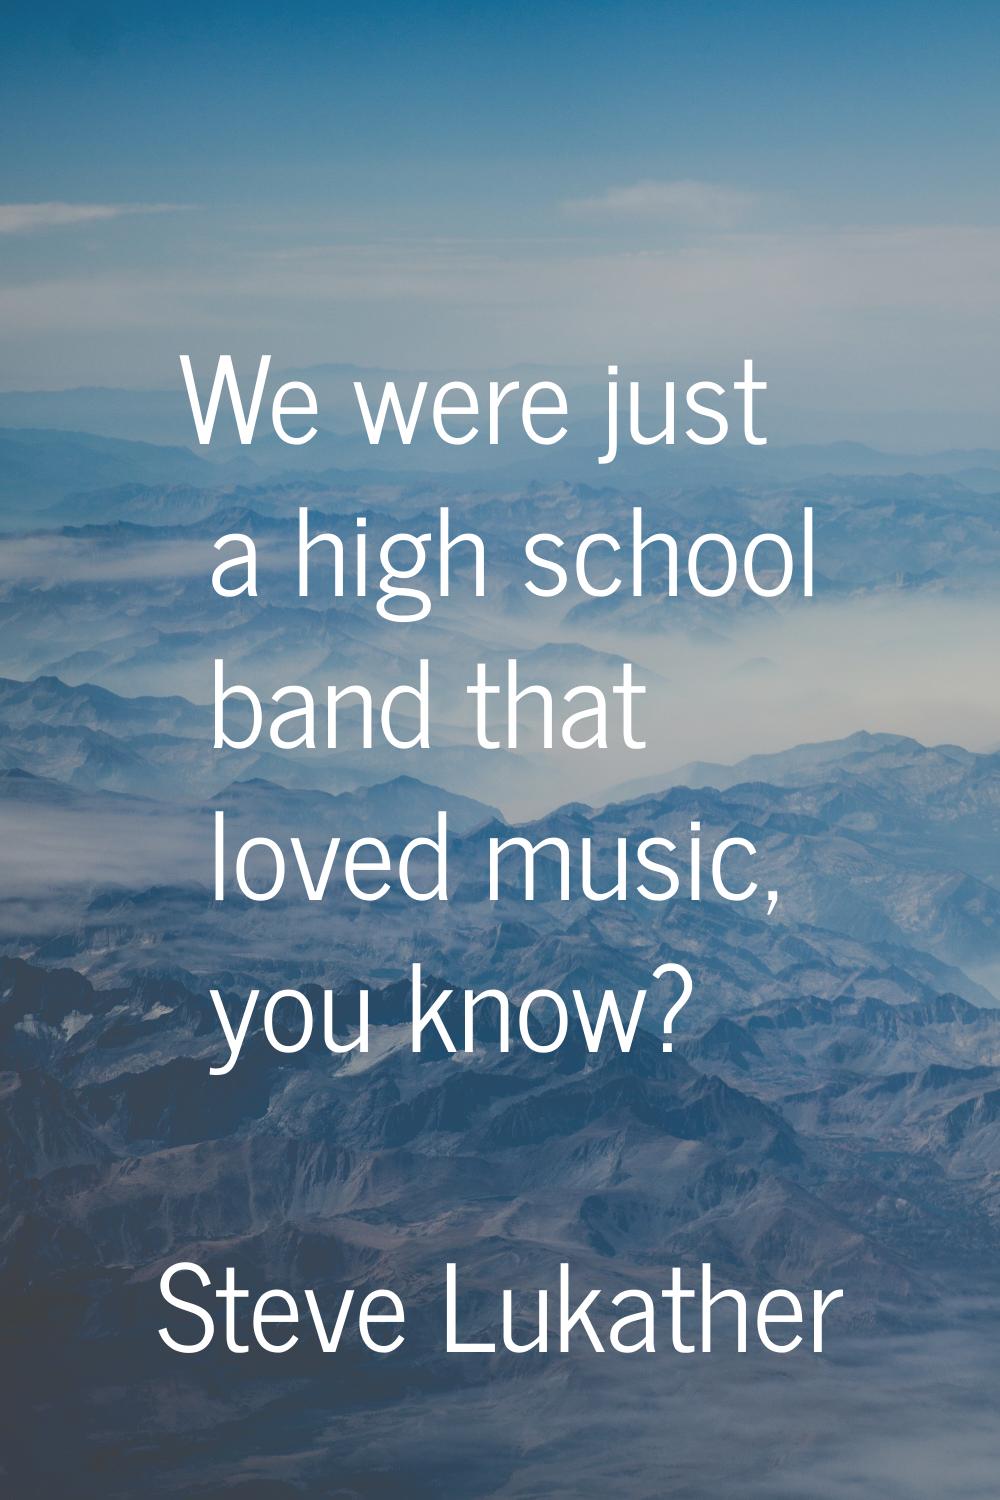 We were just a high school band that loved music, you know?